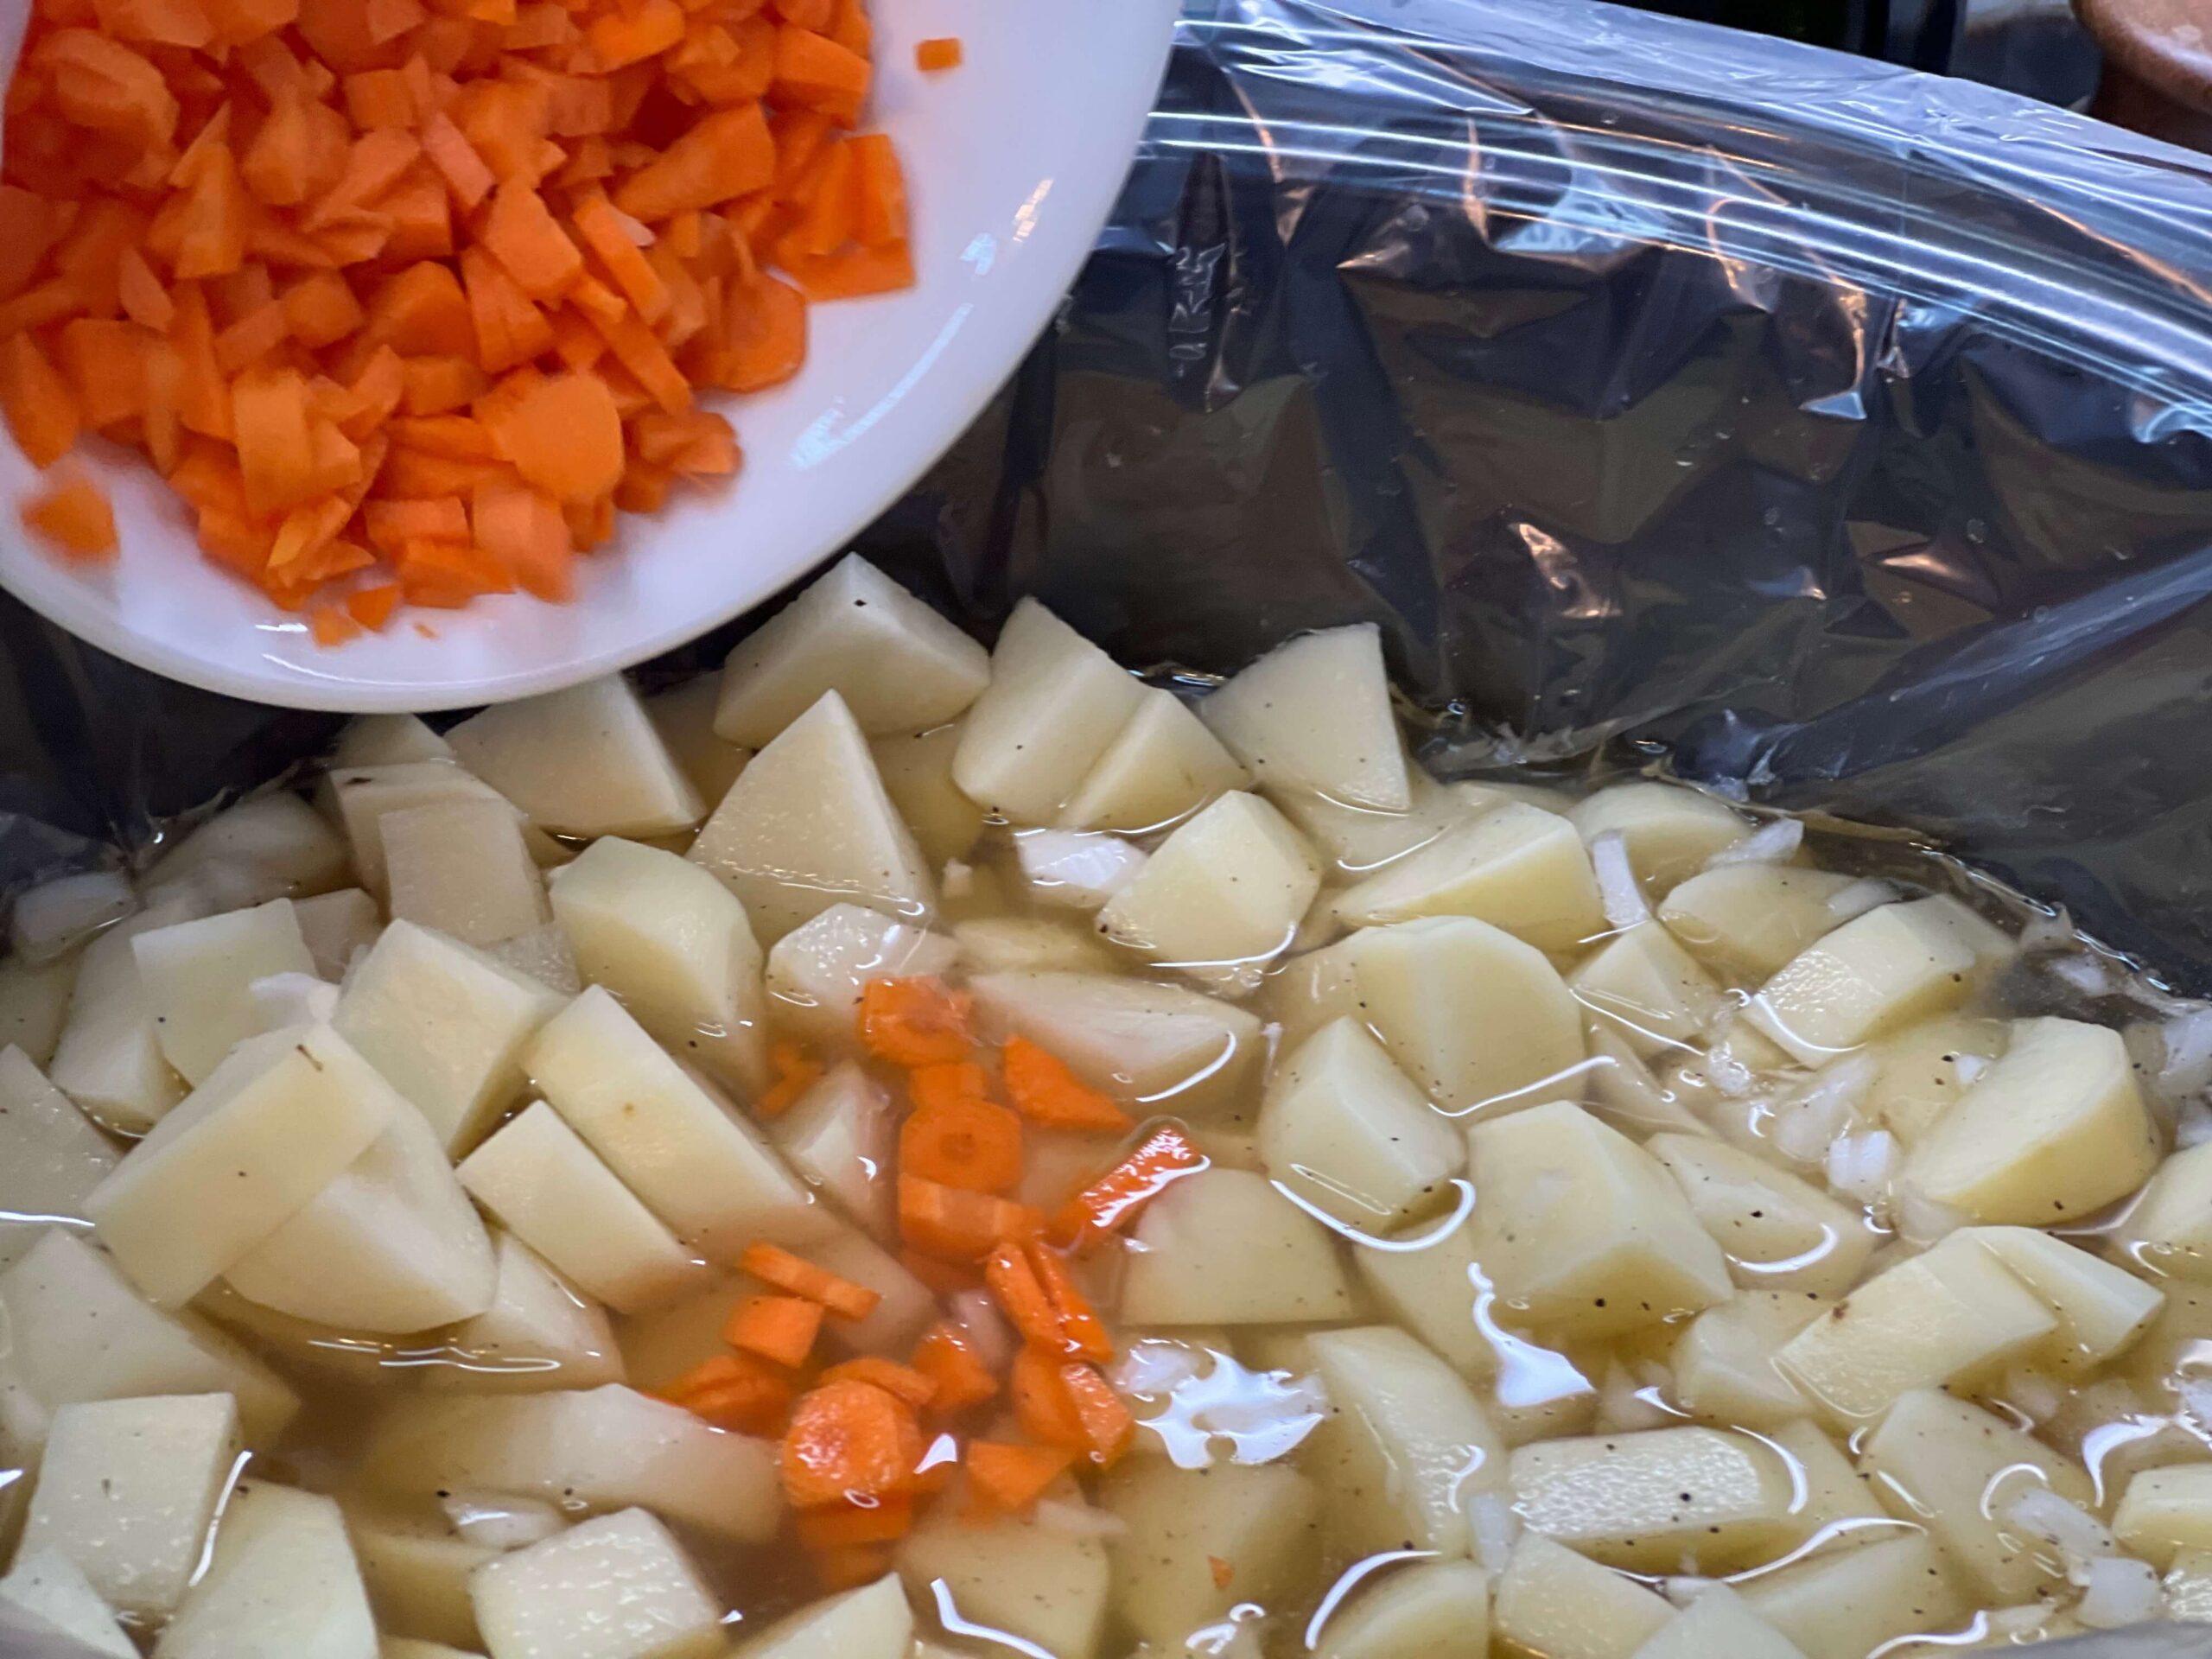 Add diced potatoes and carrots to the slow cooker.